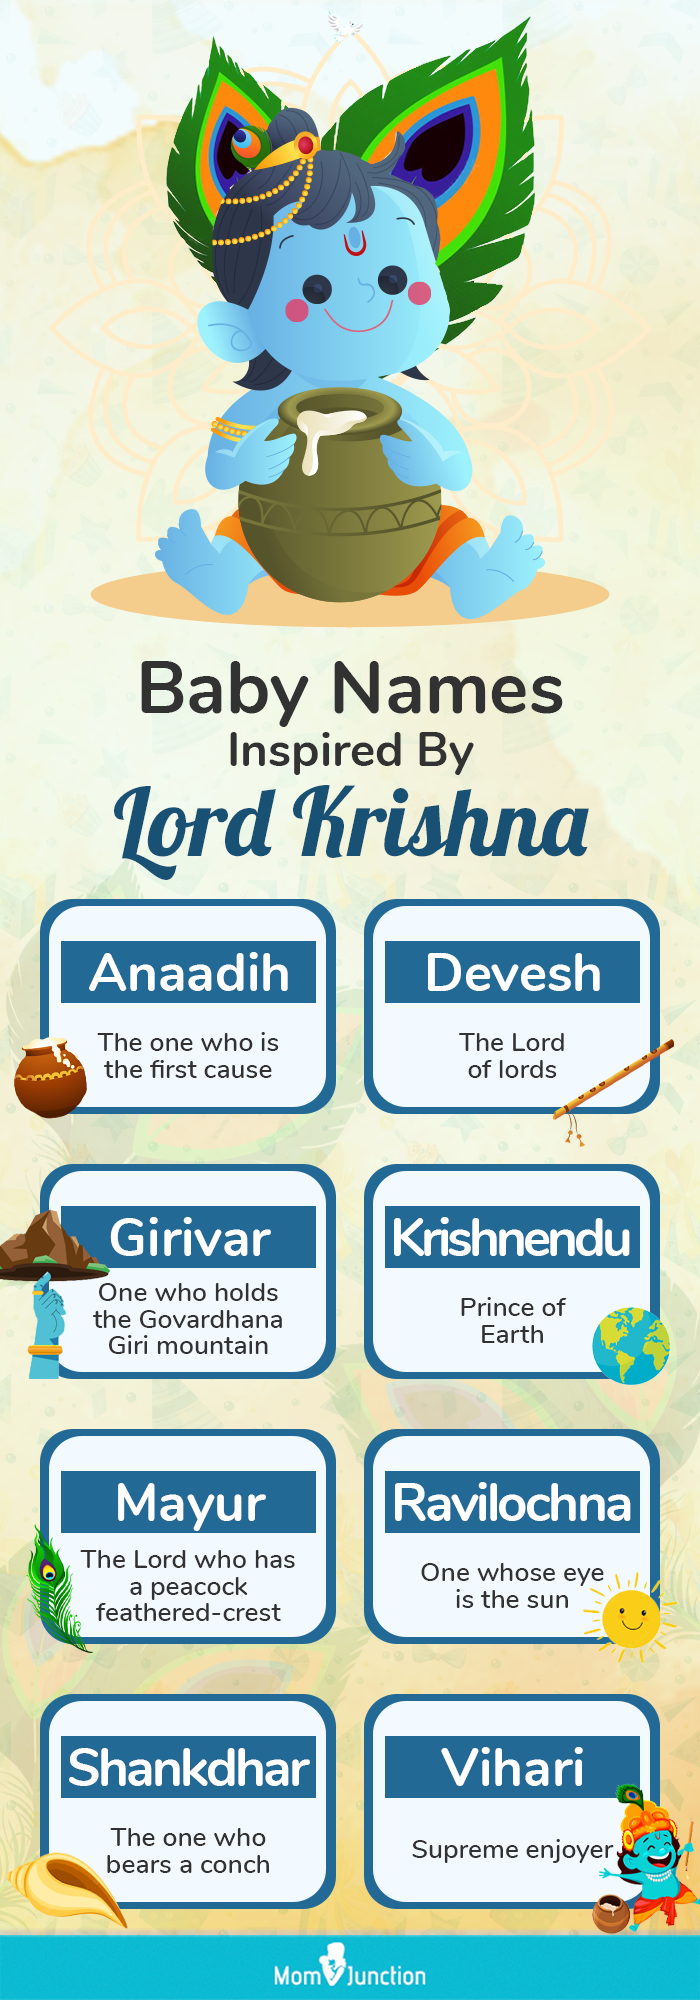 lord krishna-inspired names for your little one [infographic]